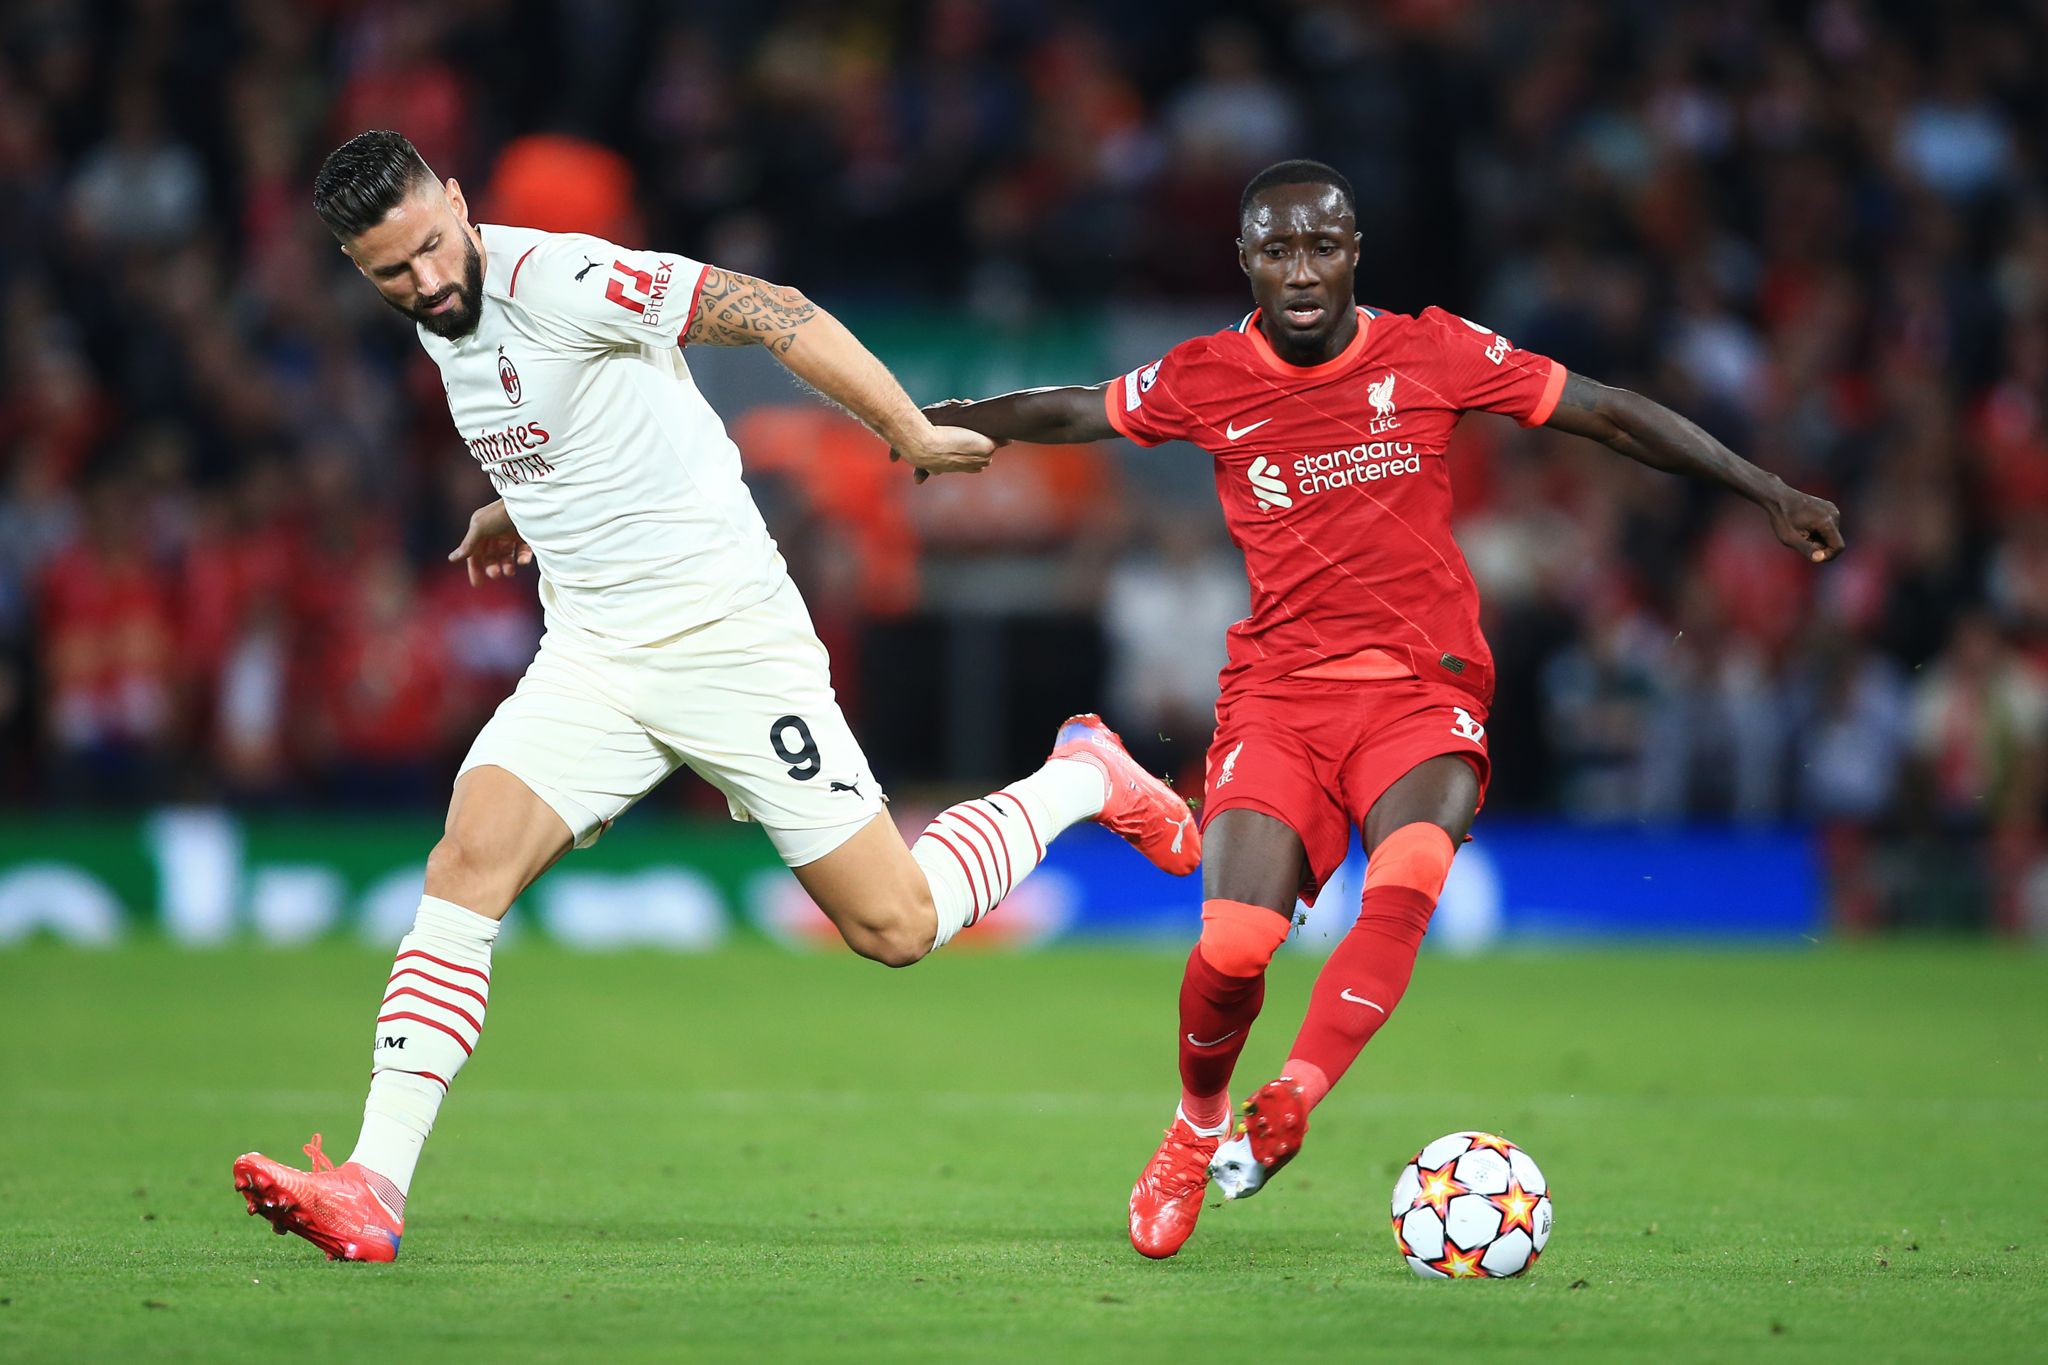 Olivier Giroud & Naby Keita in the last match between Liverpool and AC Milan at Anfield